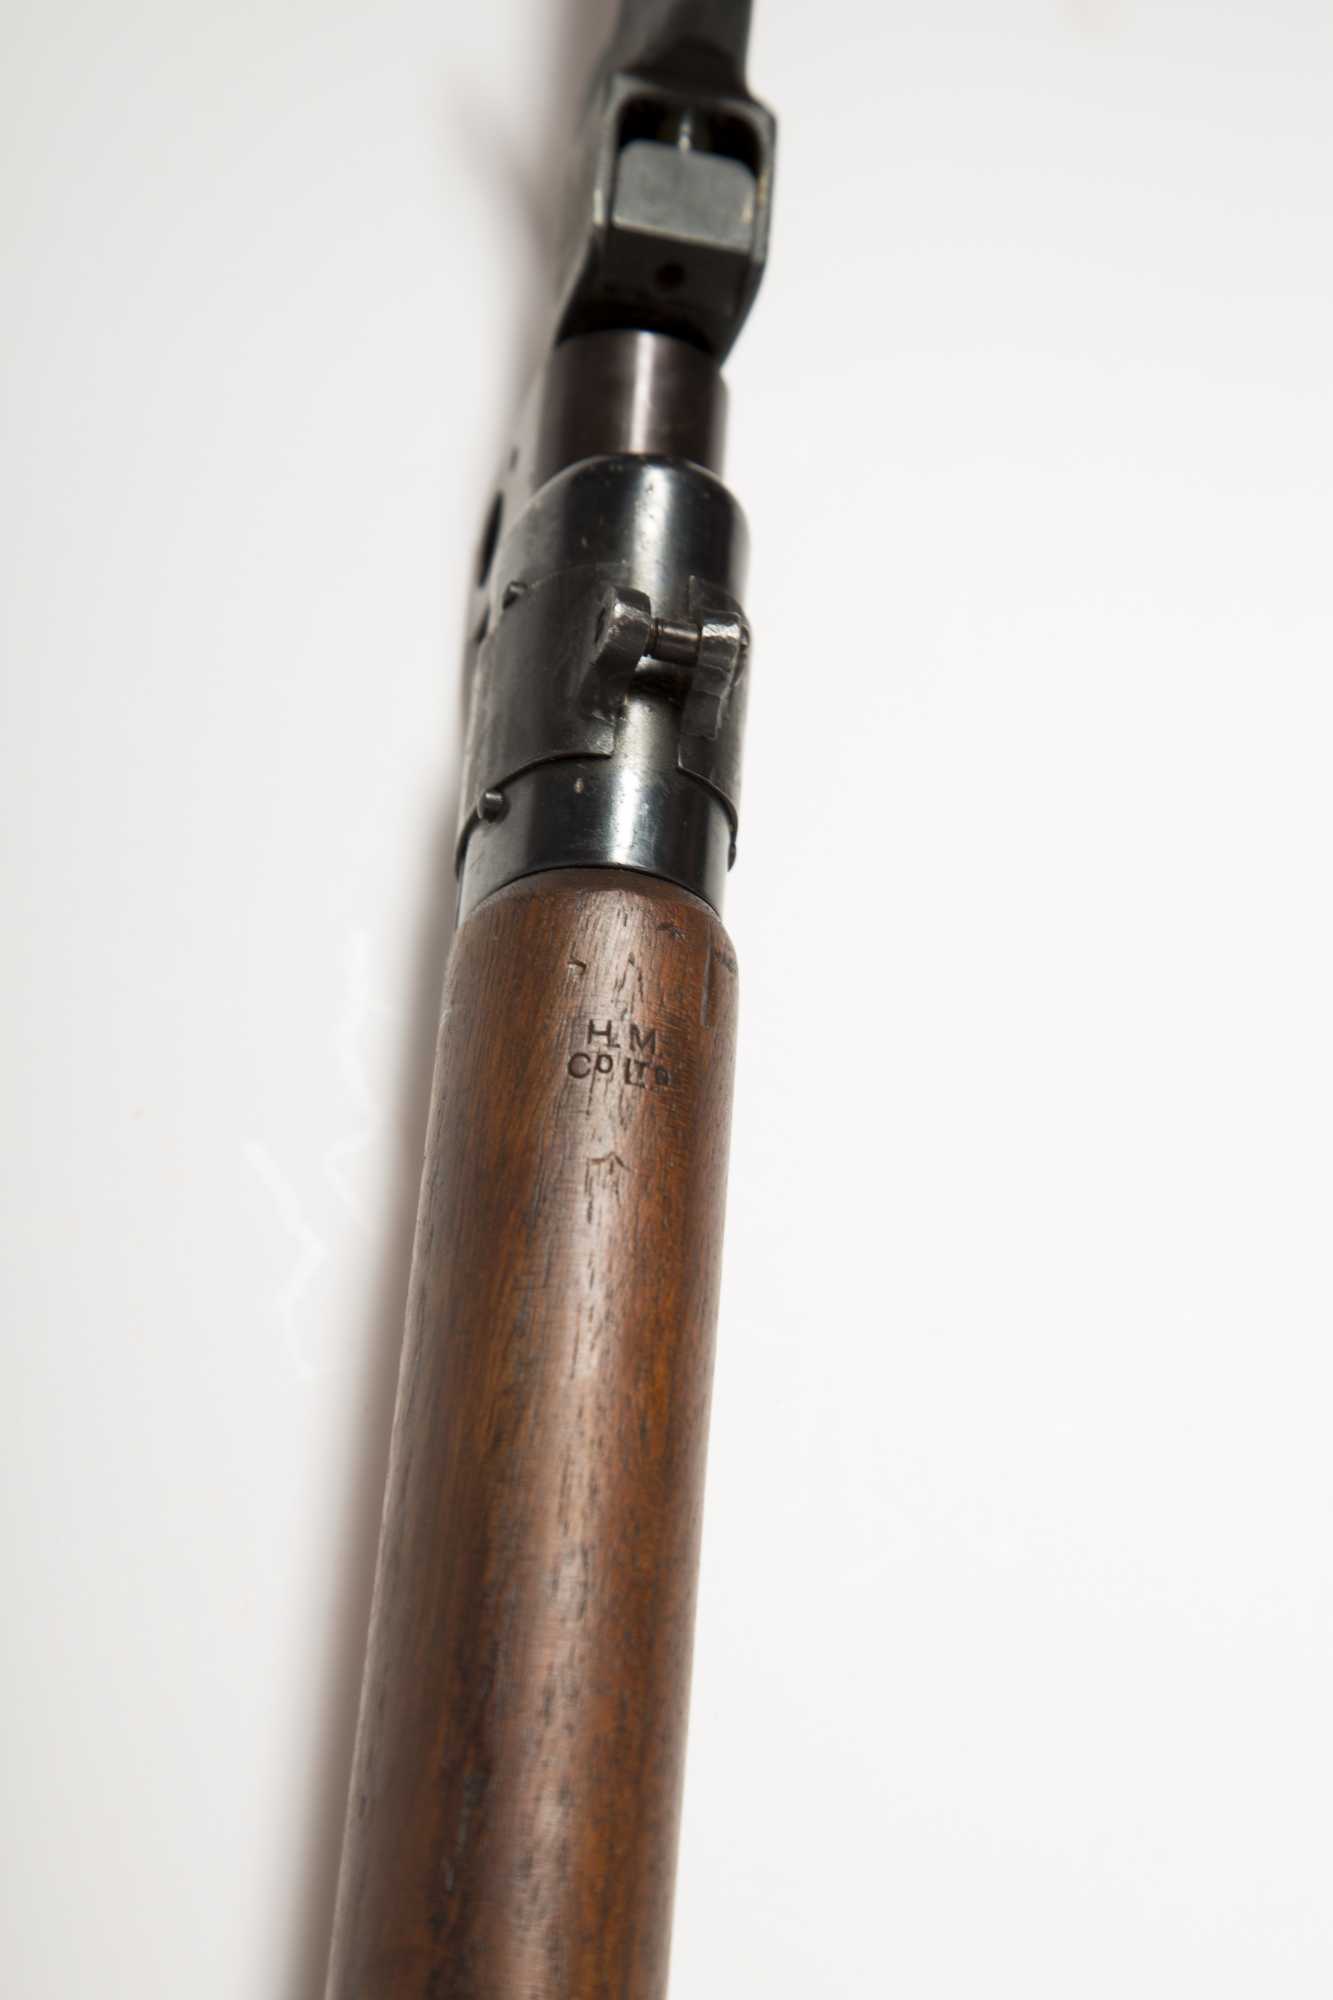 enfield rifle no4 mk1 serial number